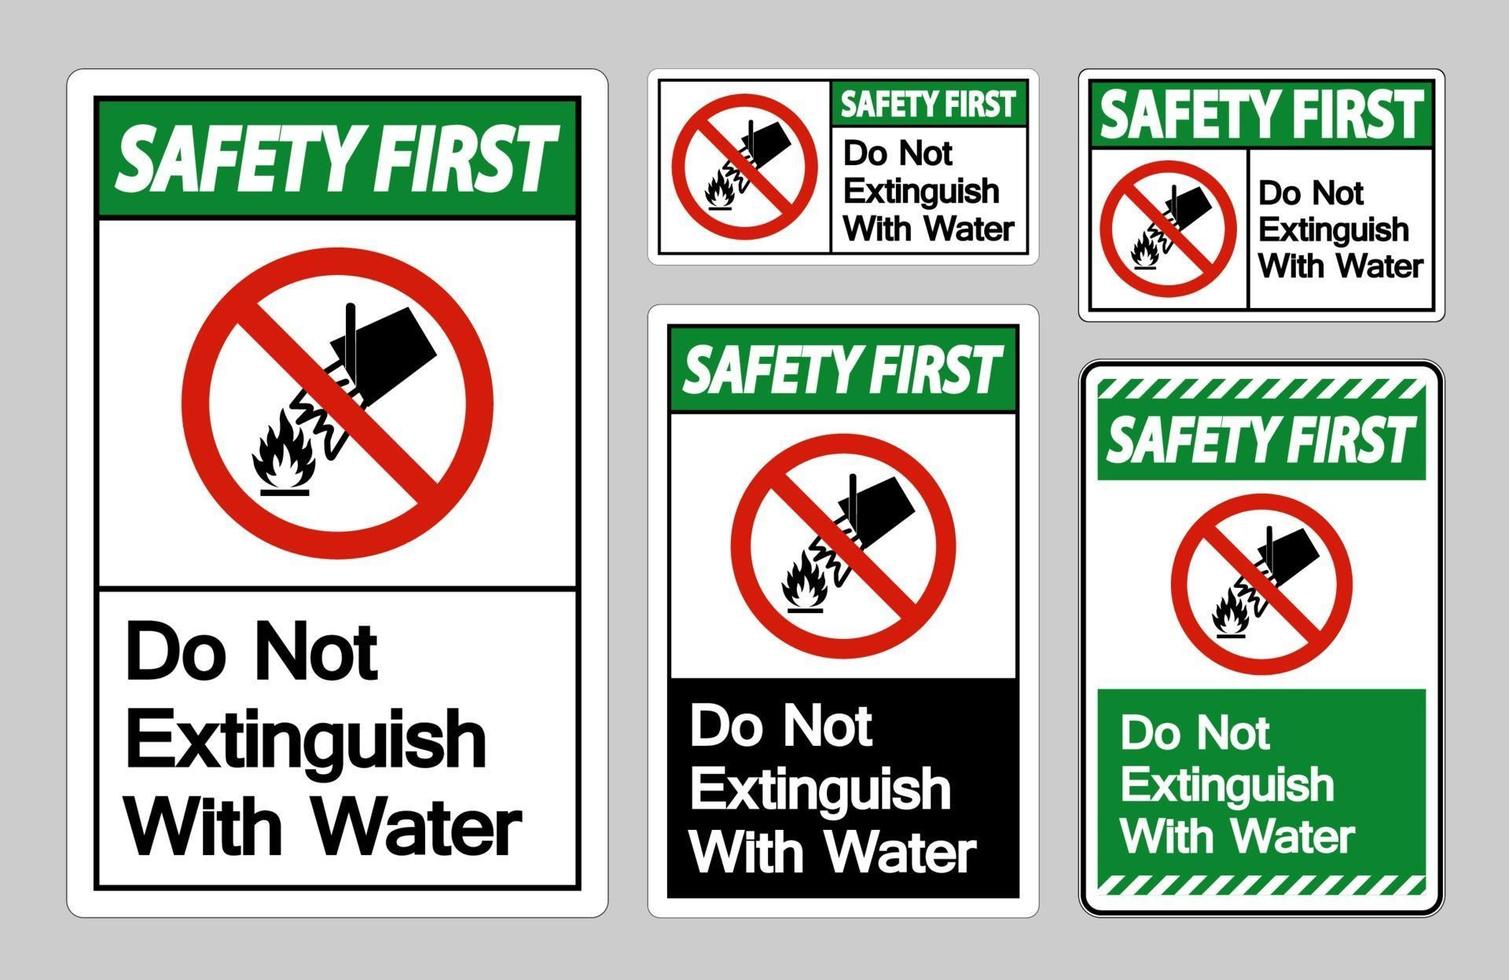 Safety First Do Not Extinguish With Water Symbol Sign On White Background vector